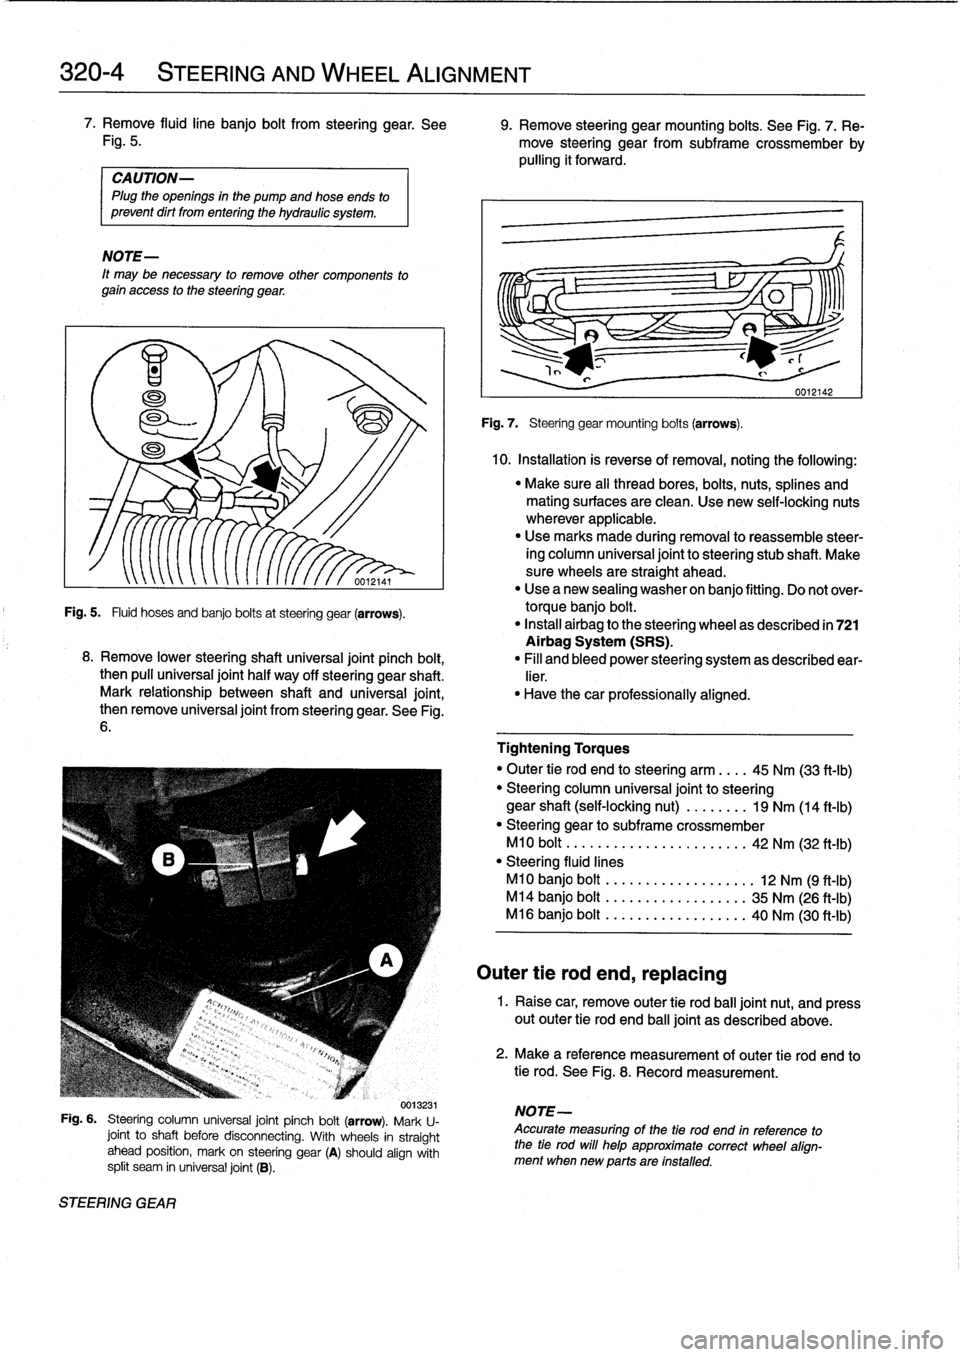 BMW 318i 1996 E36 Workshop Manual 
320-
4

	

STEERING
AND
WHEEL
ALIGNMENT

7
.
Remove
fluidline
banjo
bolt
from
steering
gear
.
See

	

9
.
Remove
steering
gearmounting
bolts
.
See
Fig
.
7
.
Re
Fig
.
5
.

	

move
steering
gear
from
s